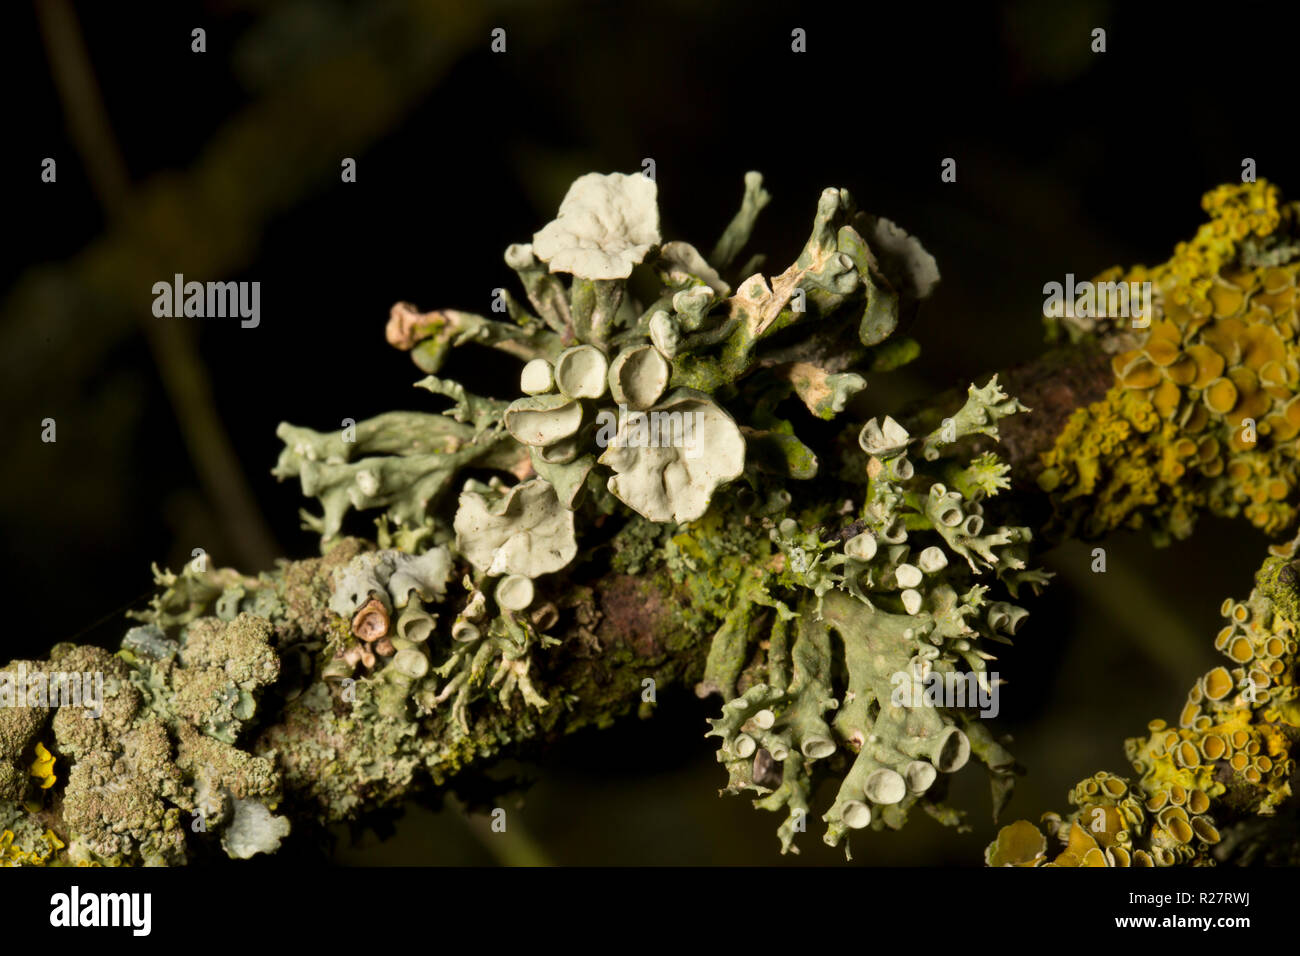 A lichen of the genus Ramalina growing on trees lining a public footpath. The lichen pictured matches the description for Ramalina fastigiata but this Stock Photo